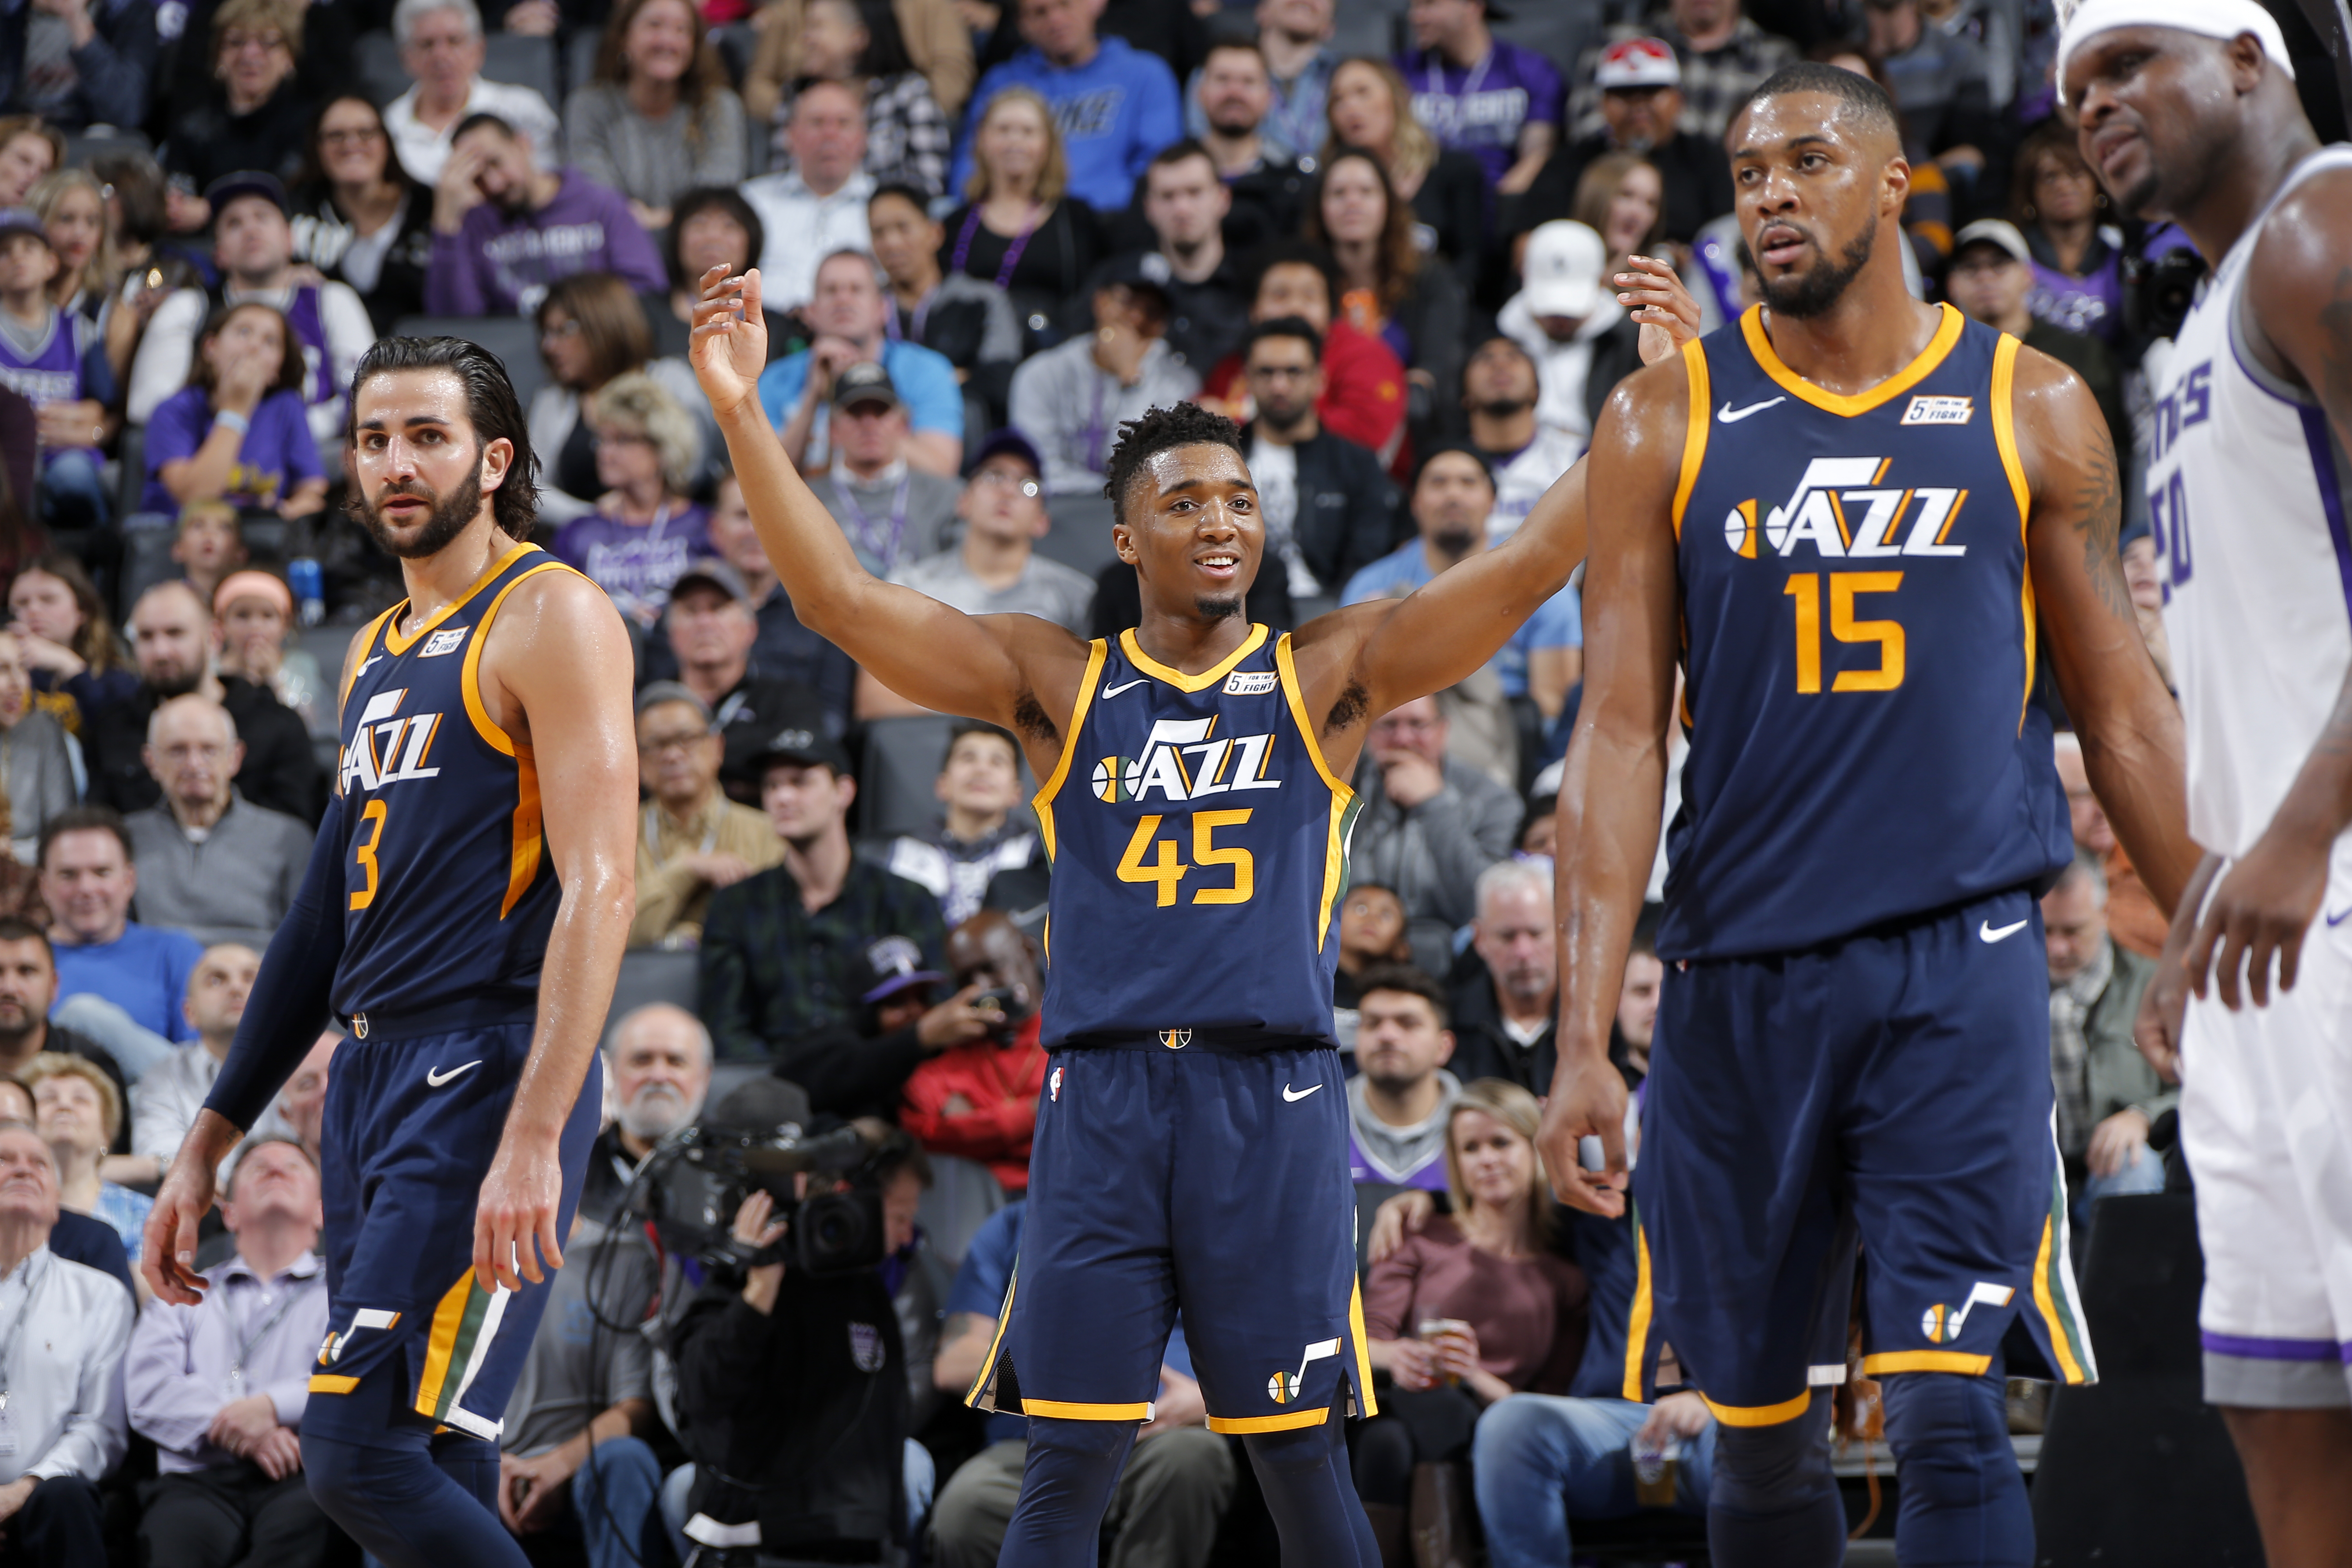 Jazz rookie Donovan Mitchell to compete in Slam Dunk contest